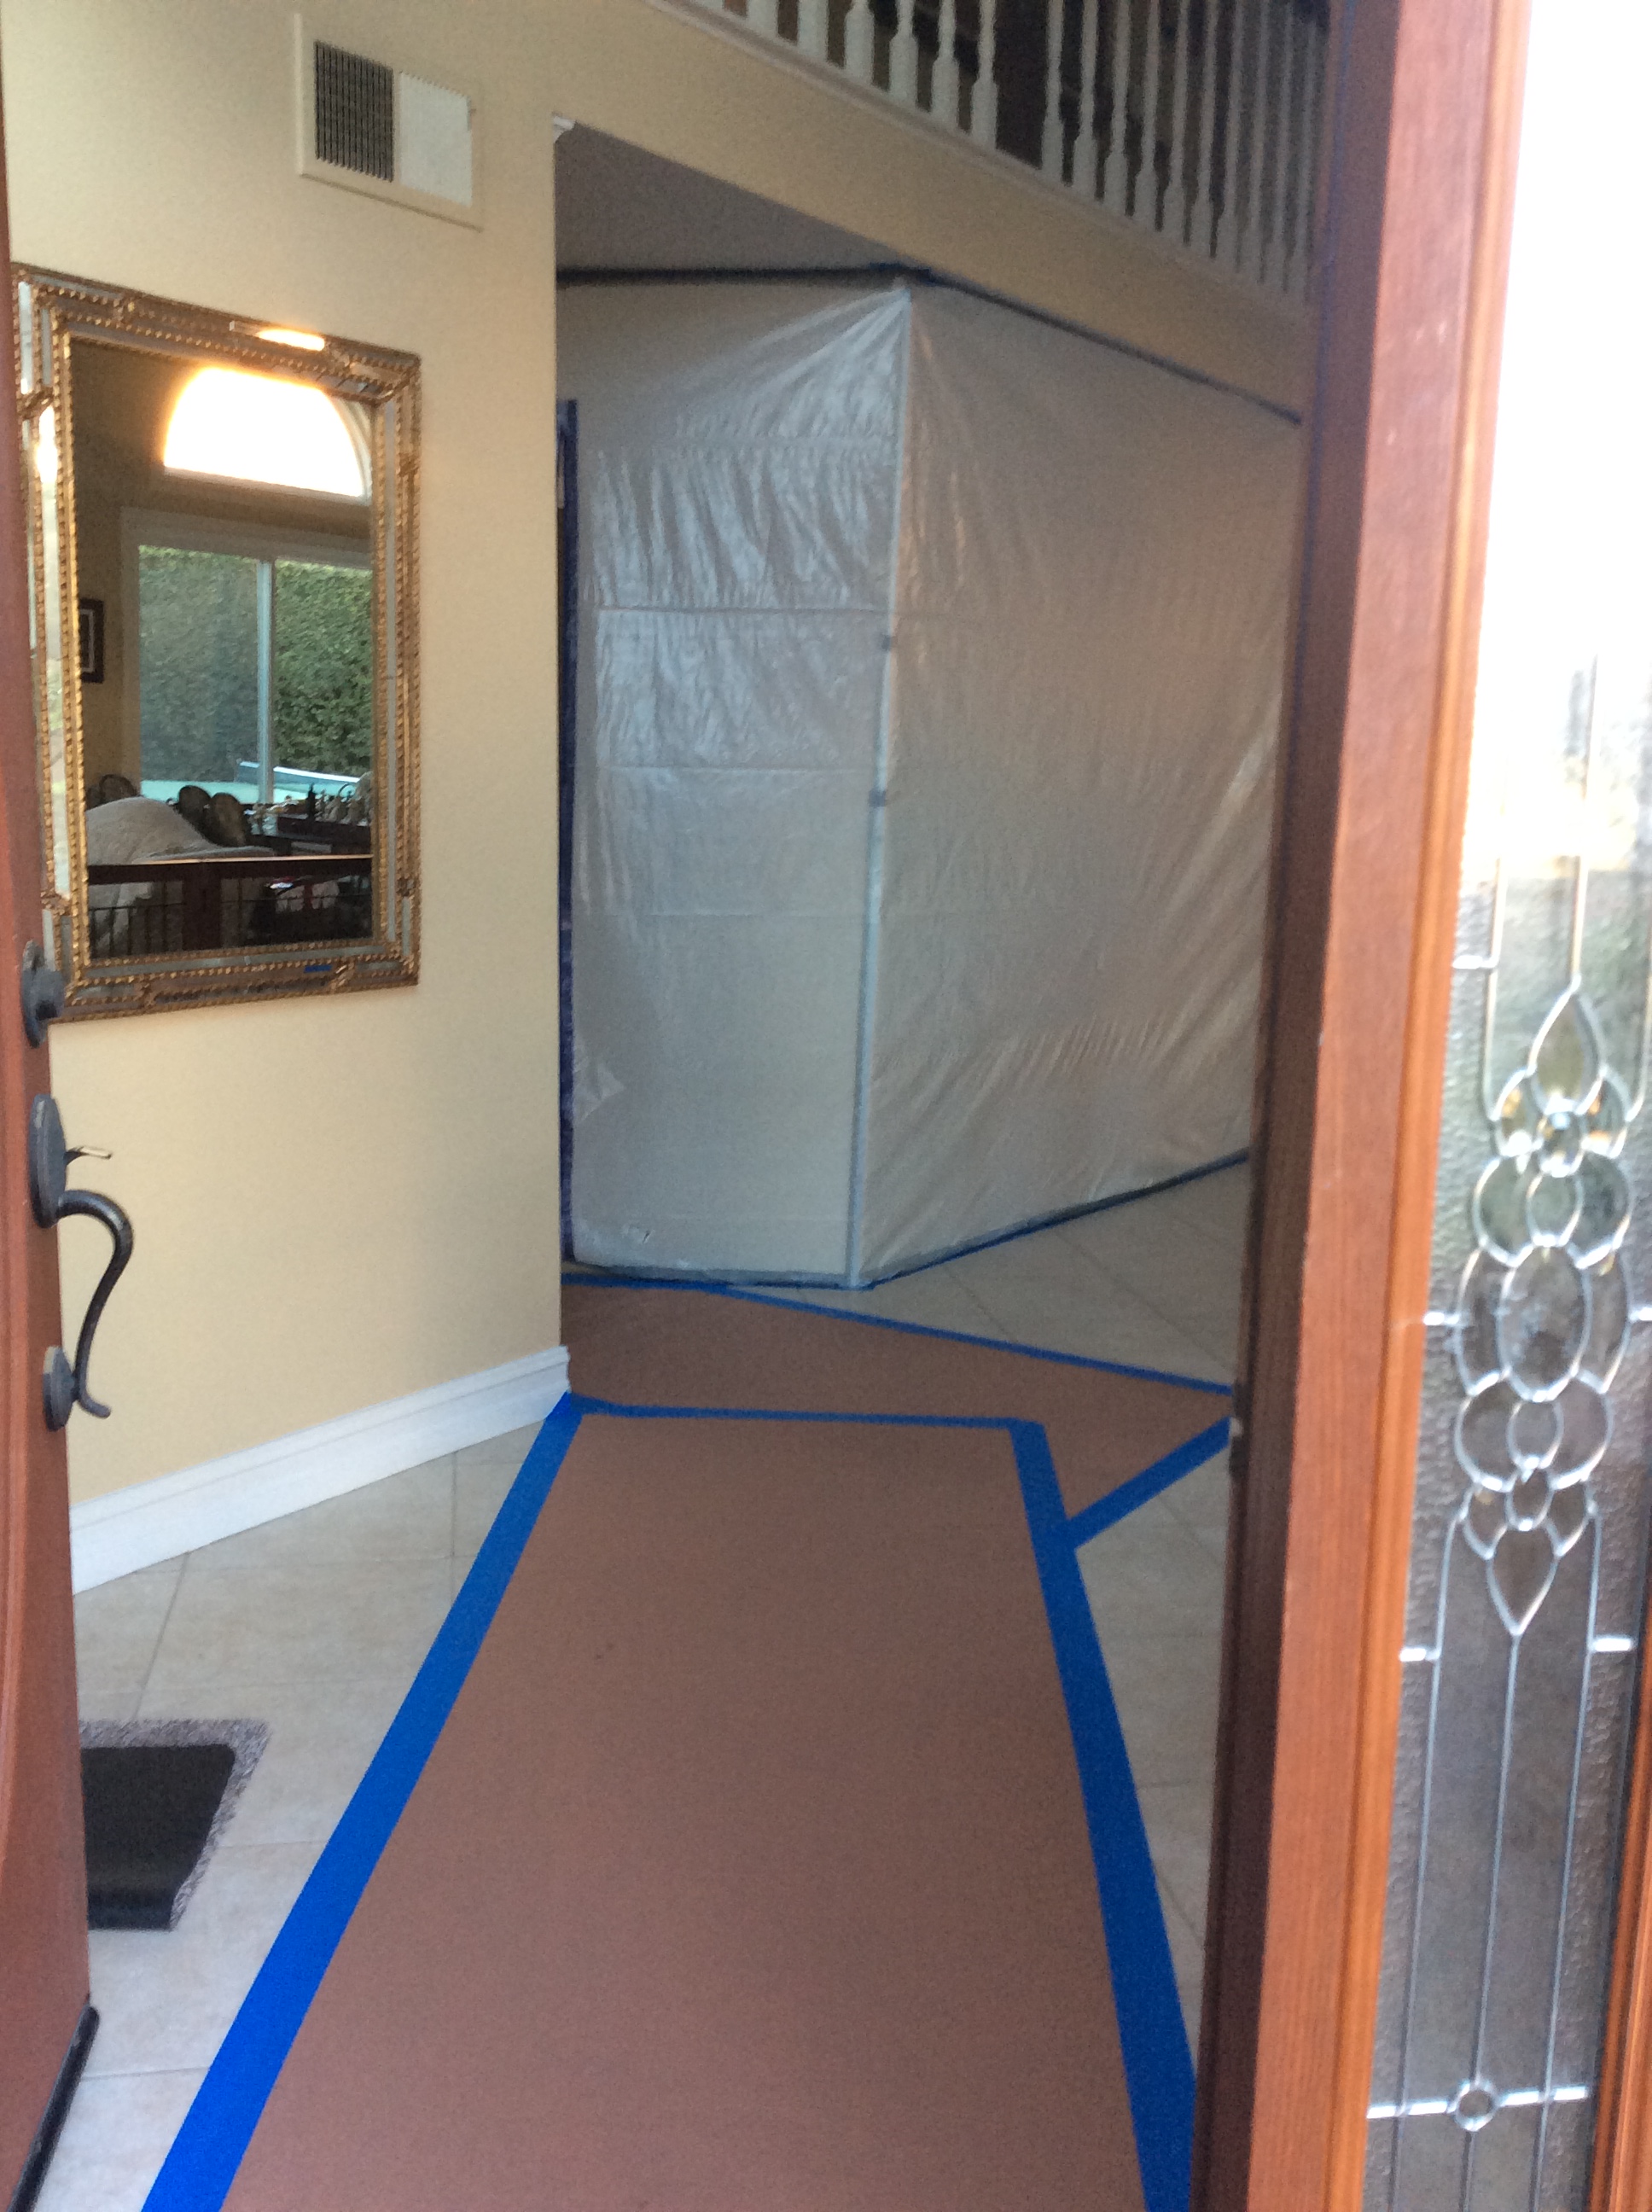 Mold remediation is just one of many services SERVPRO of Anaheim West is equipped to handle.